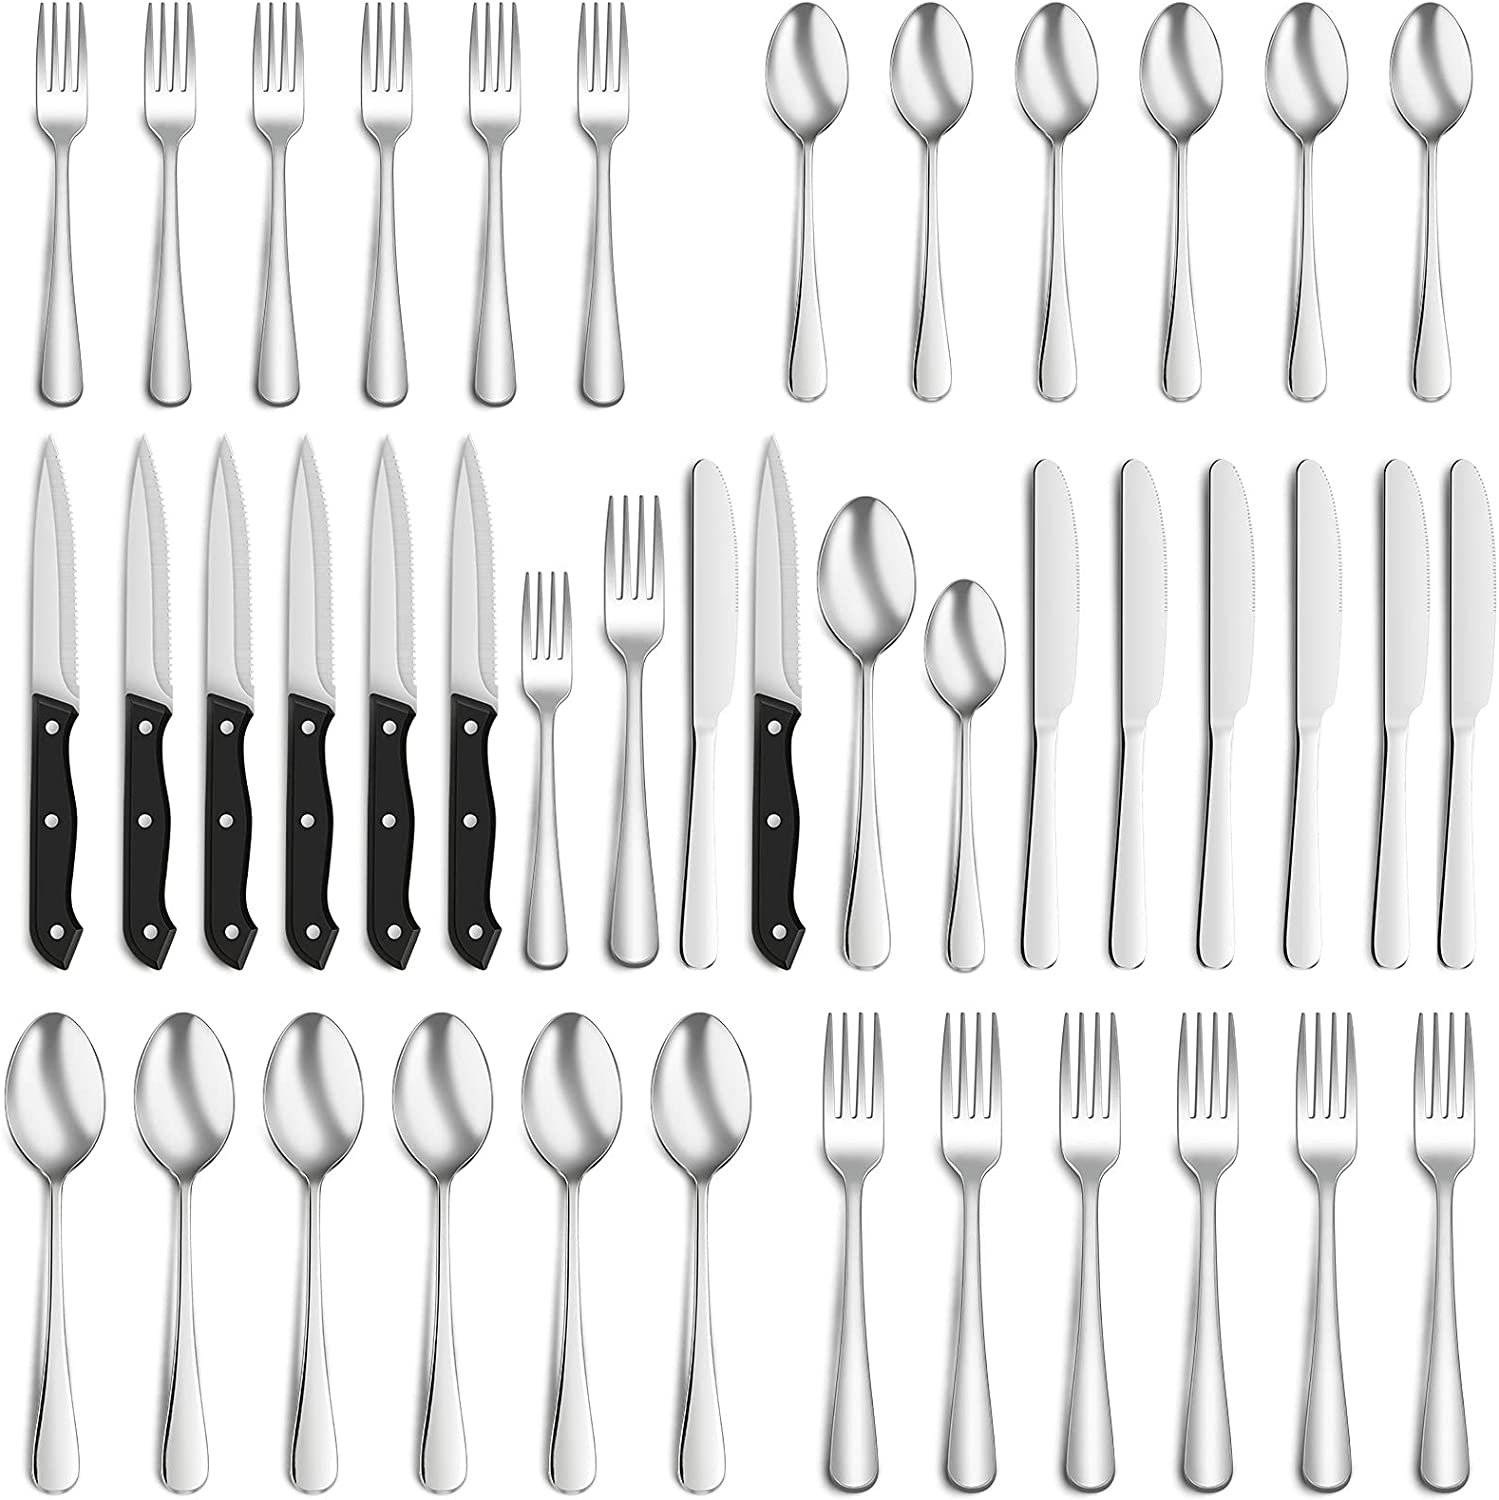 36-Piece Silverware Set with Steak Knives for 6, Food-Grade Stainless Steel Utensils Set Includes Spoons Forks Knives,Tableware Cutlery Set For Home Restaurant Hotel